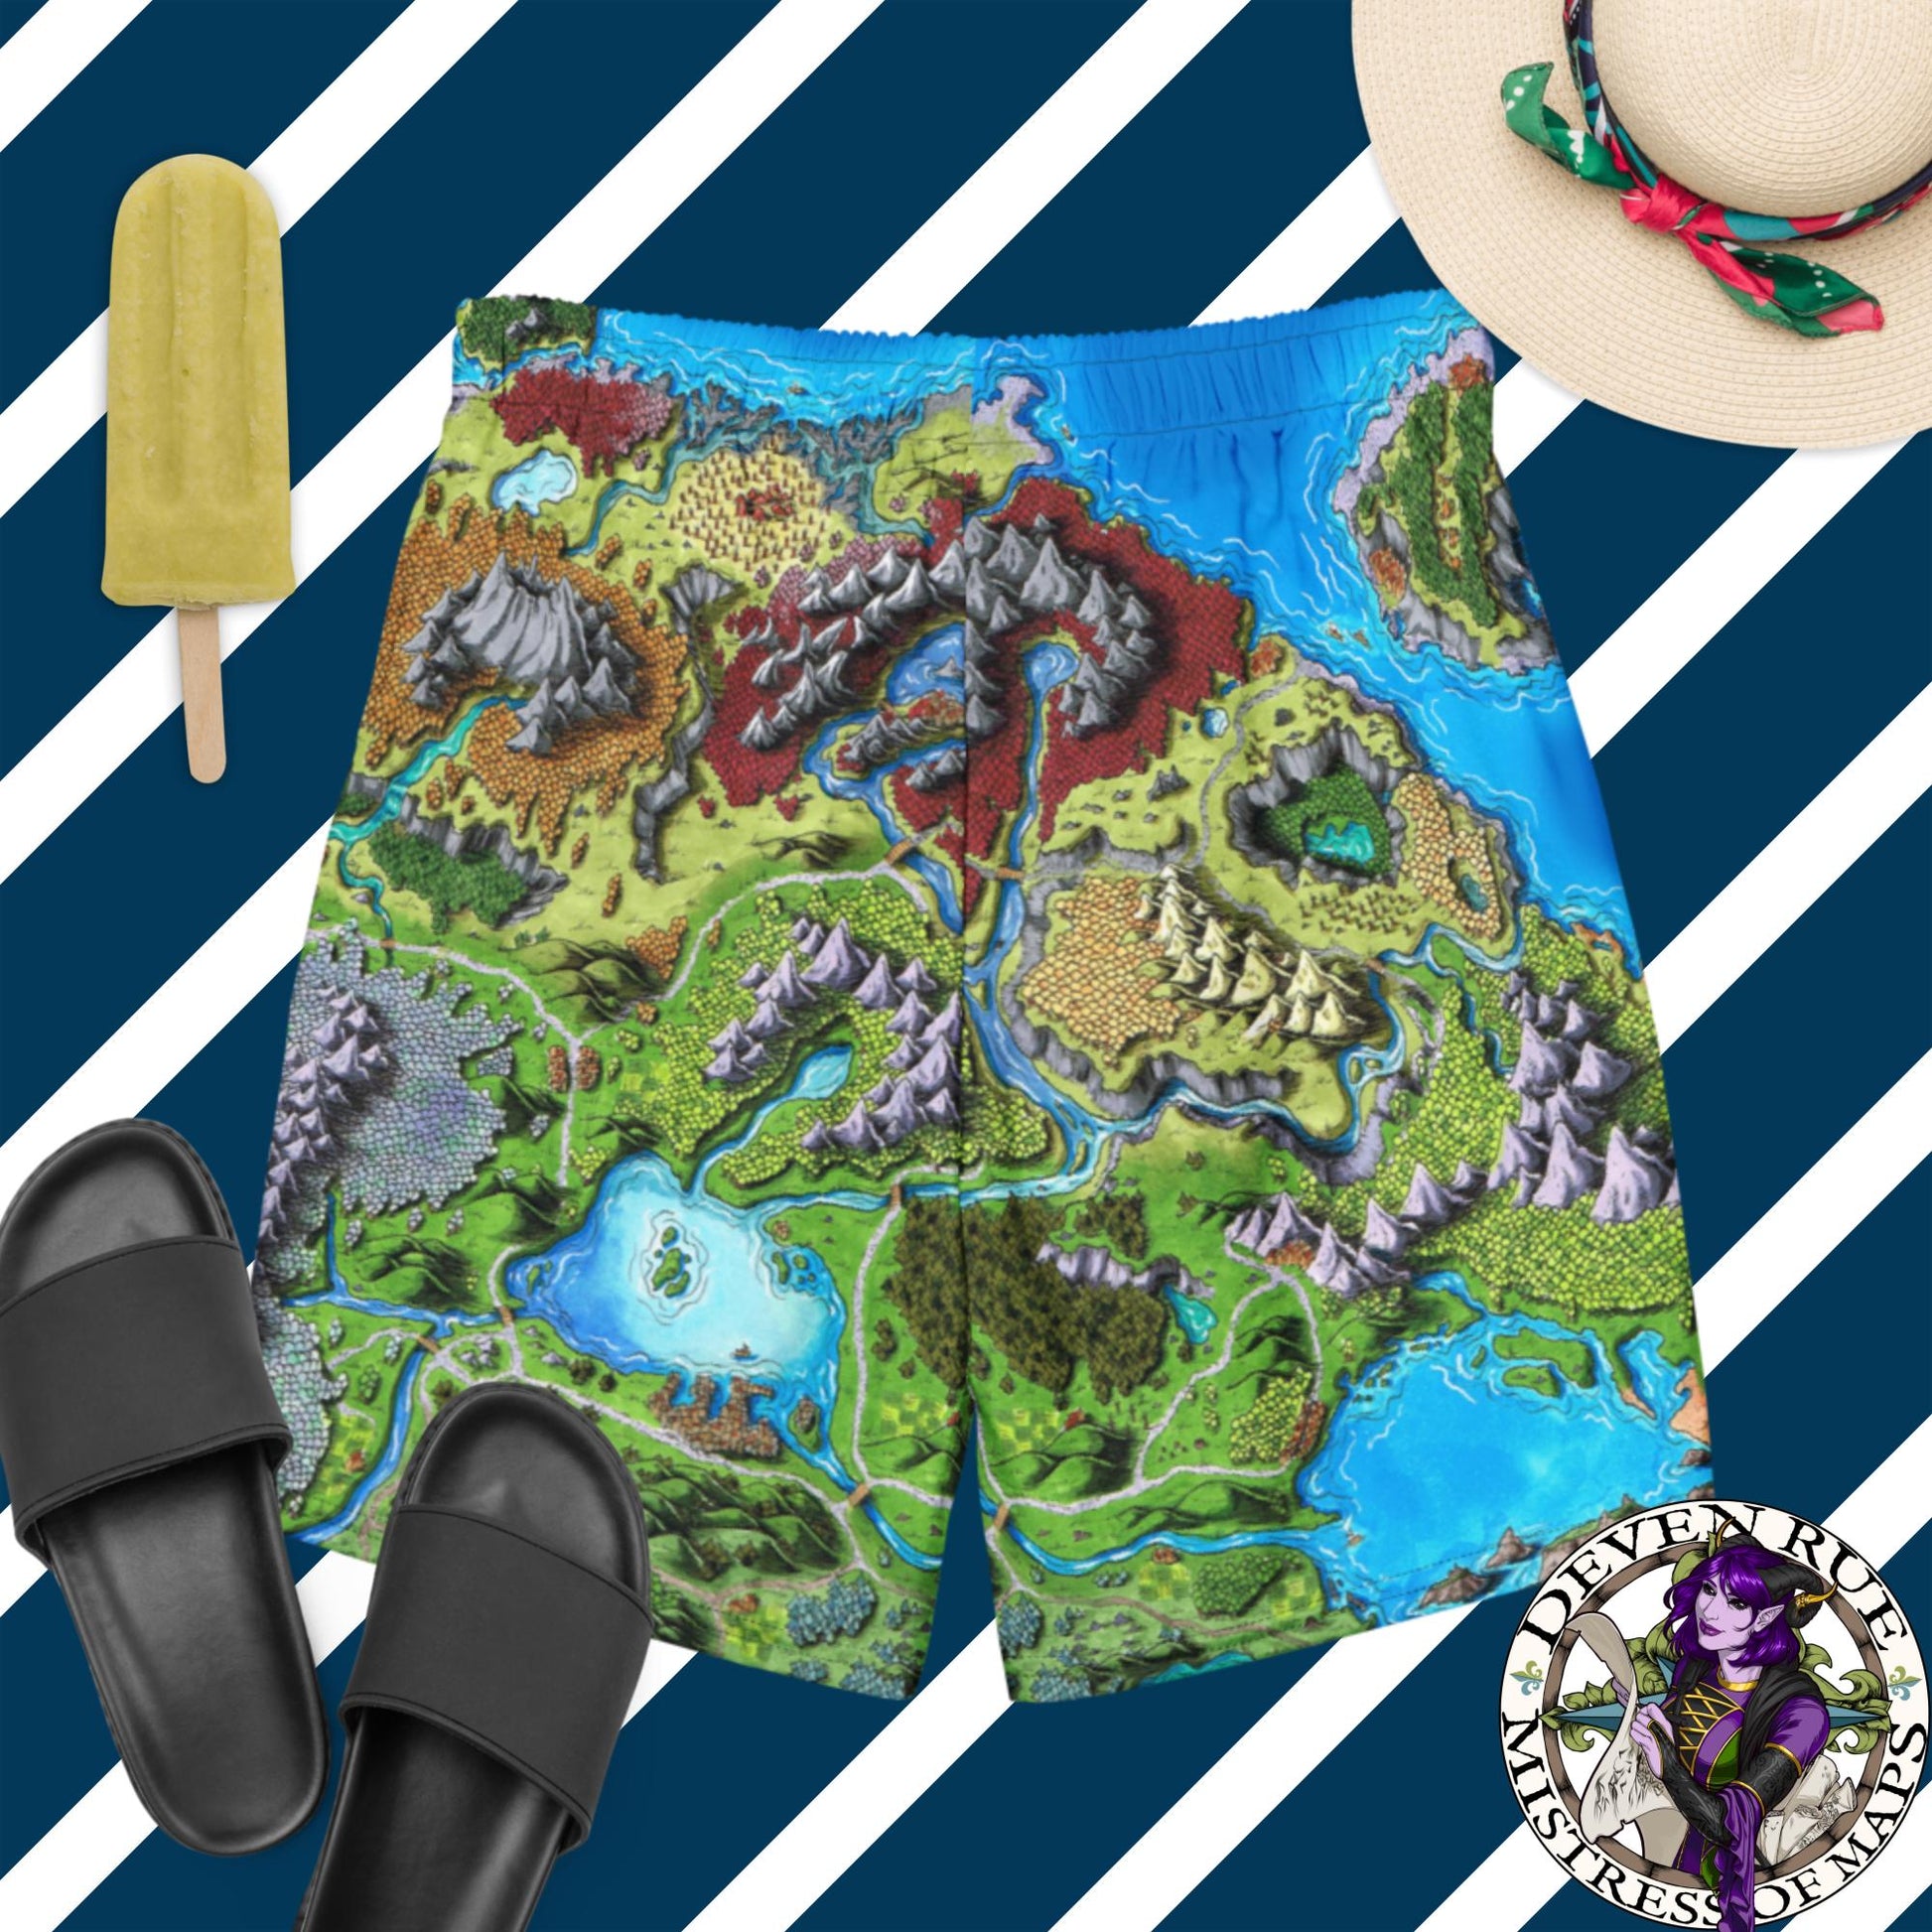 Swim trunks with the Taur'Syldor map sit on a blue and white striped surface with sandals, hat, and ice cream pop.